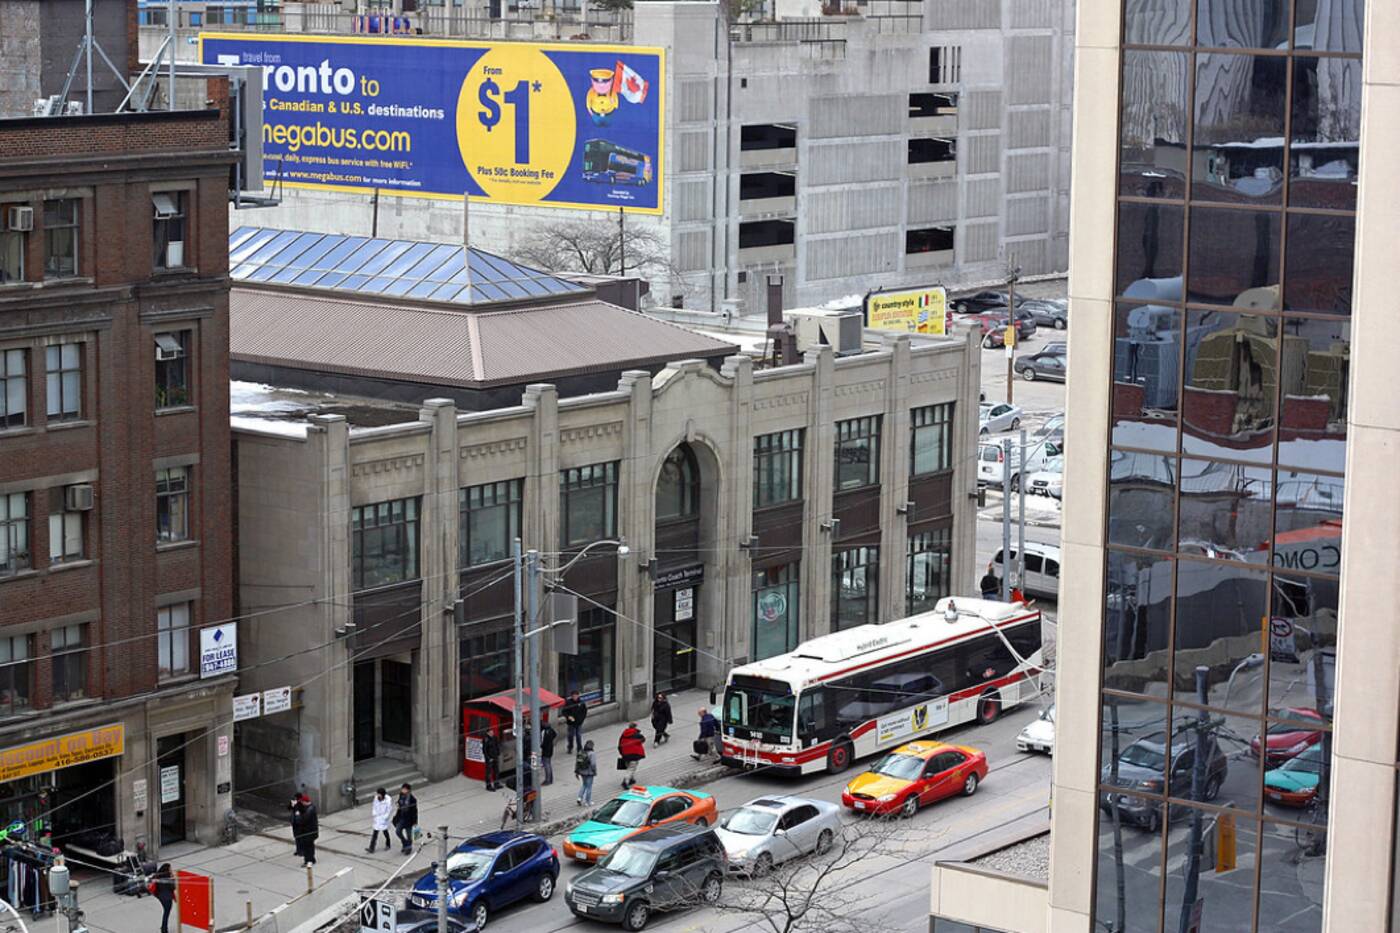 Toronto's historic coach terminal is shutting down after 90 years